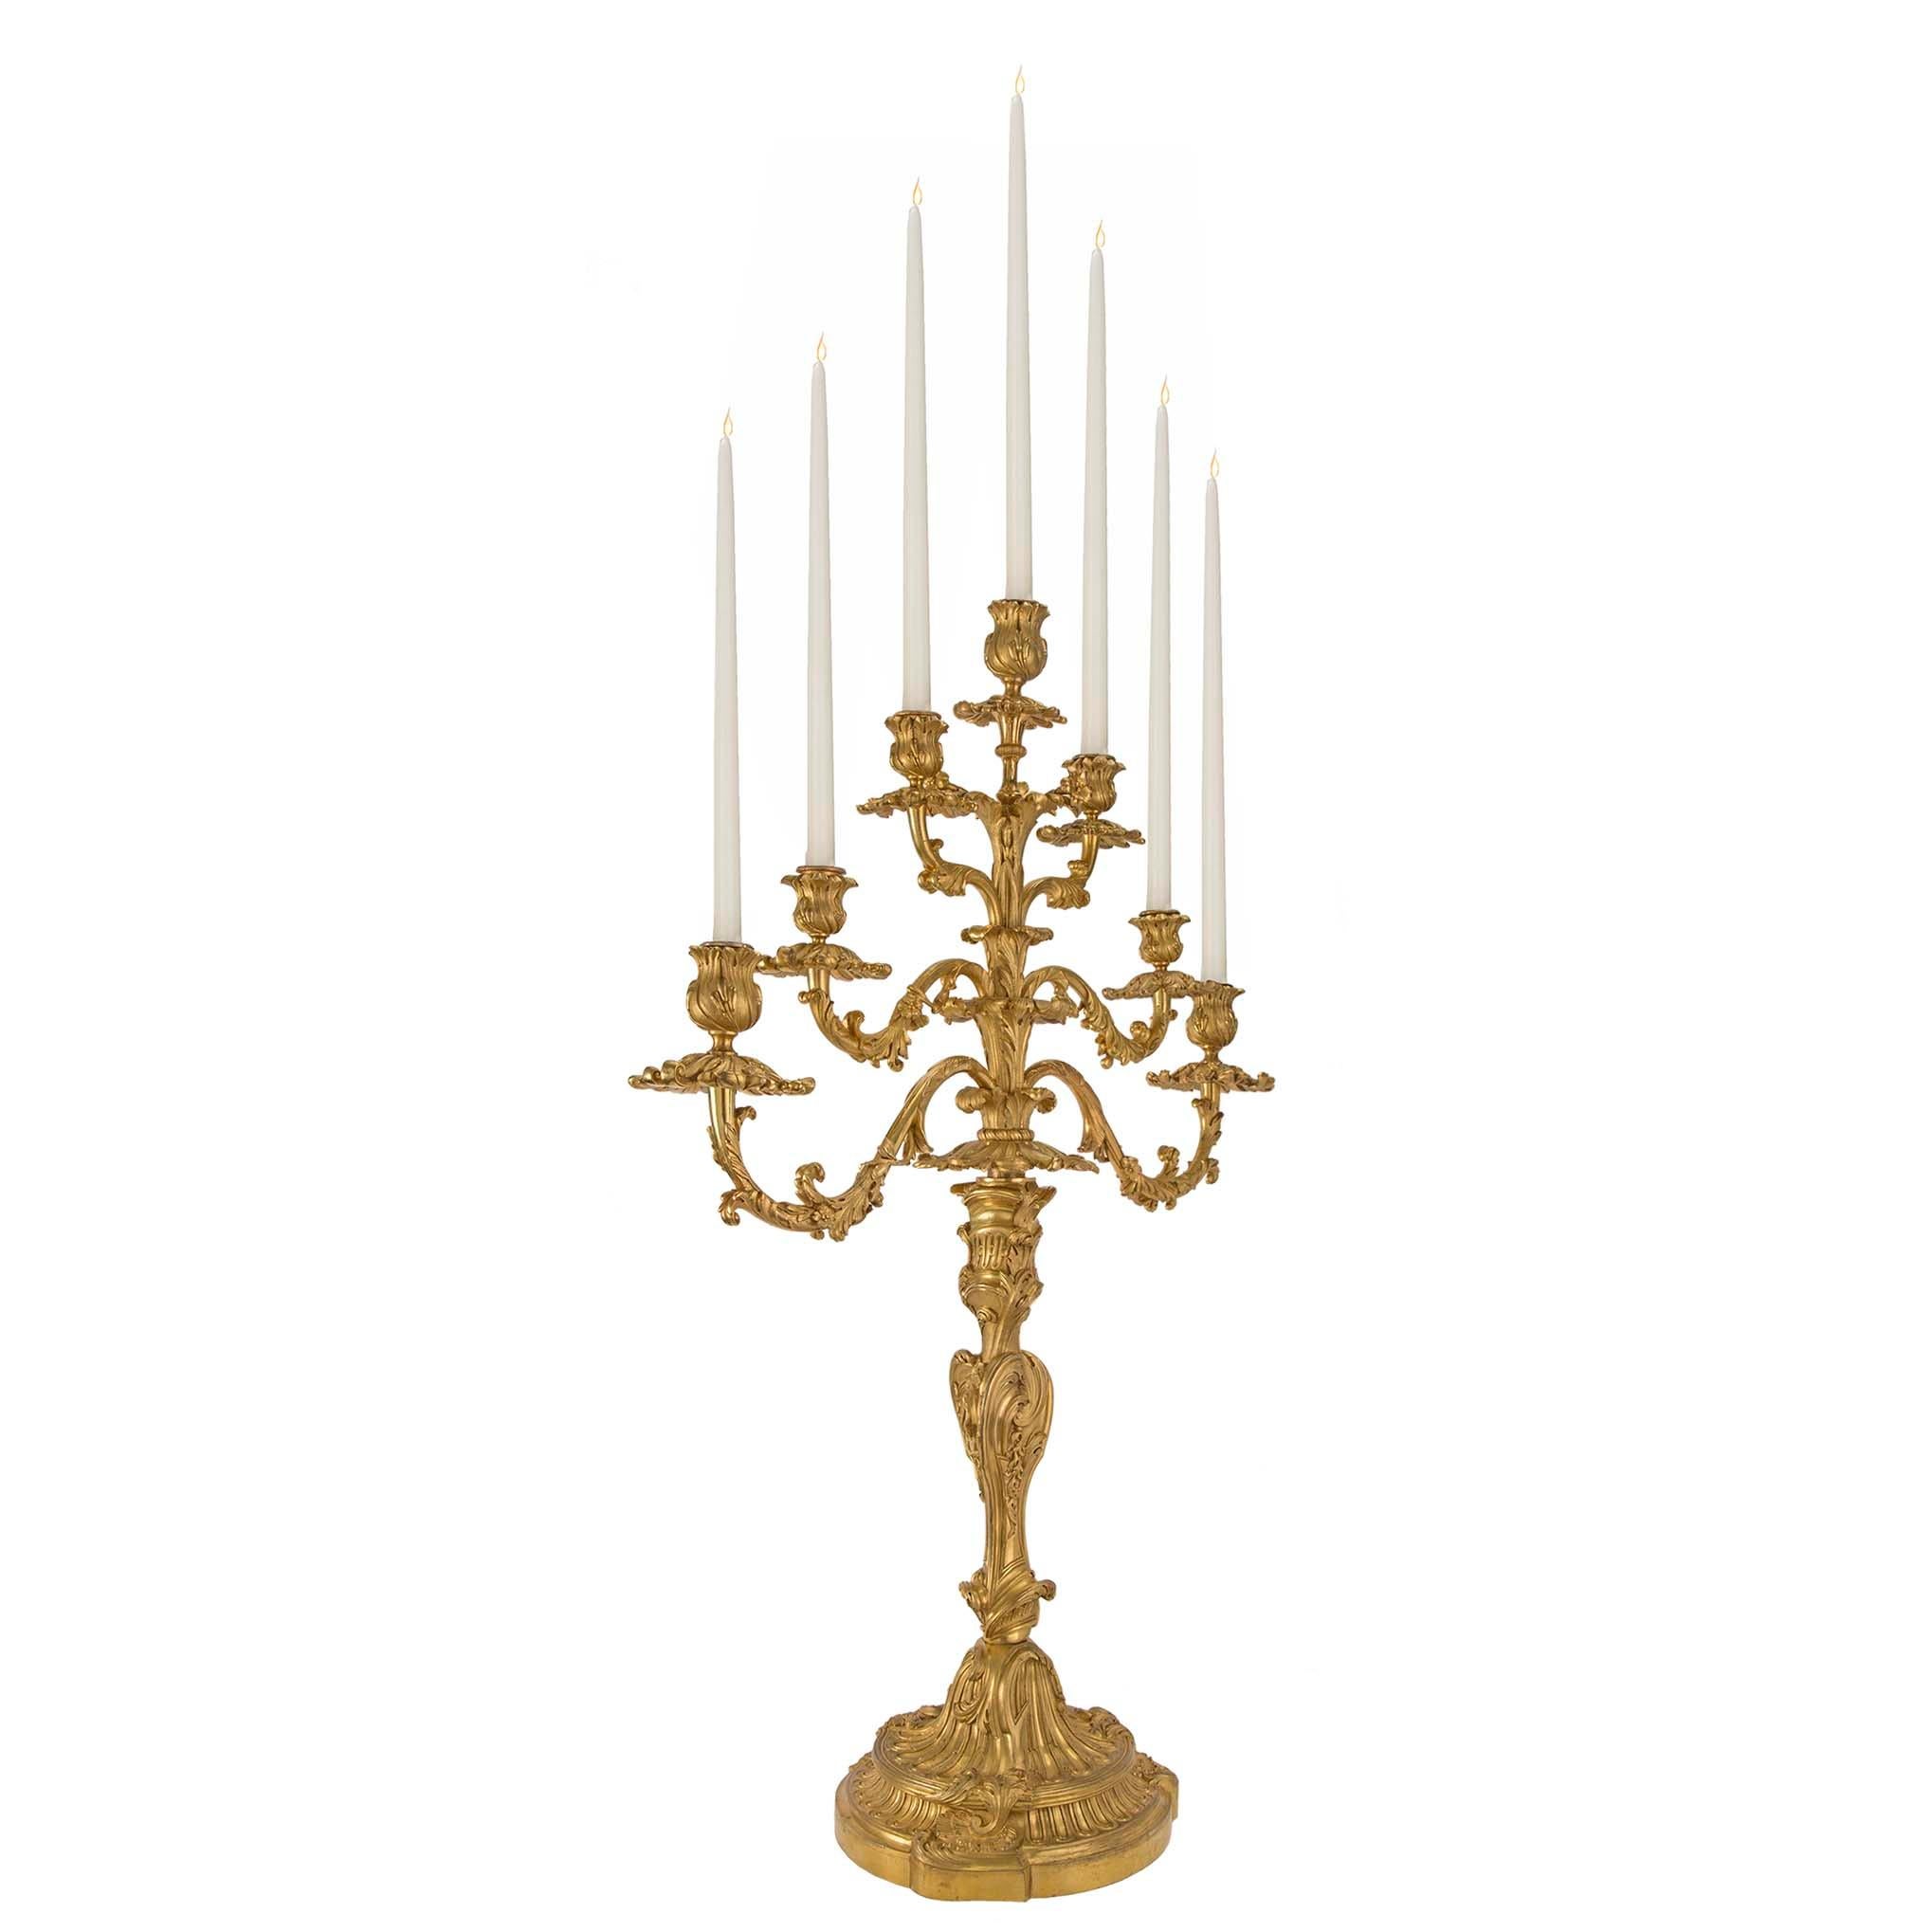 A stunning and monumental pair of French early 18th century Régence Period seven arm ormolu candelabras. Each statement making candelabra is raised by a striking mottled circular base with fabulous fluted and scrolled foliate patterns. The elegant